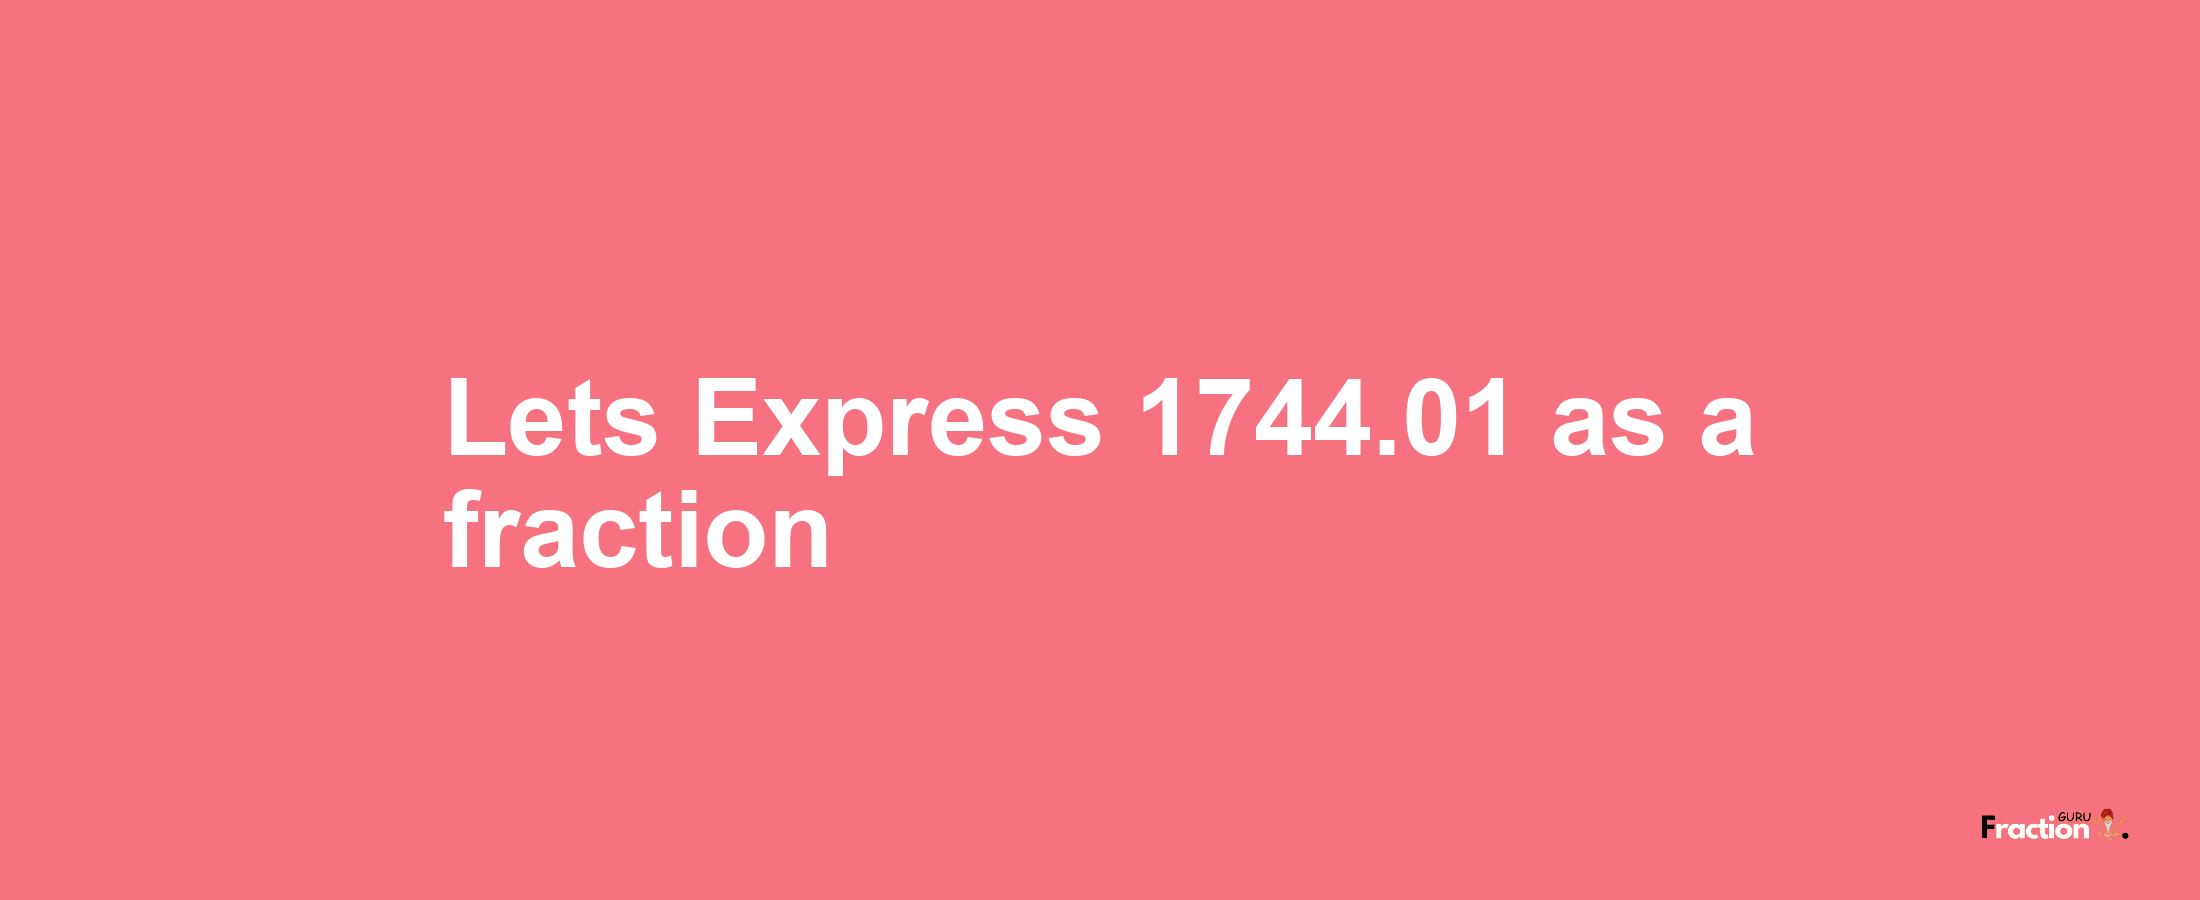 Lets Express 1744.01 as afraction